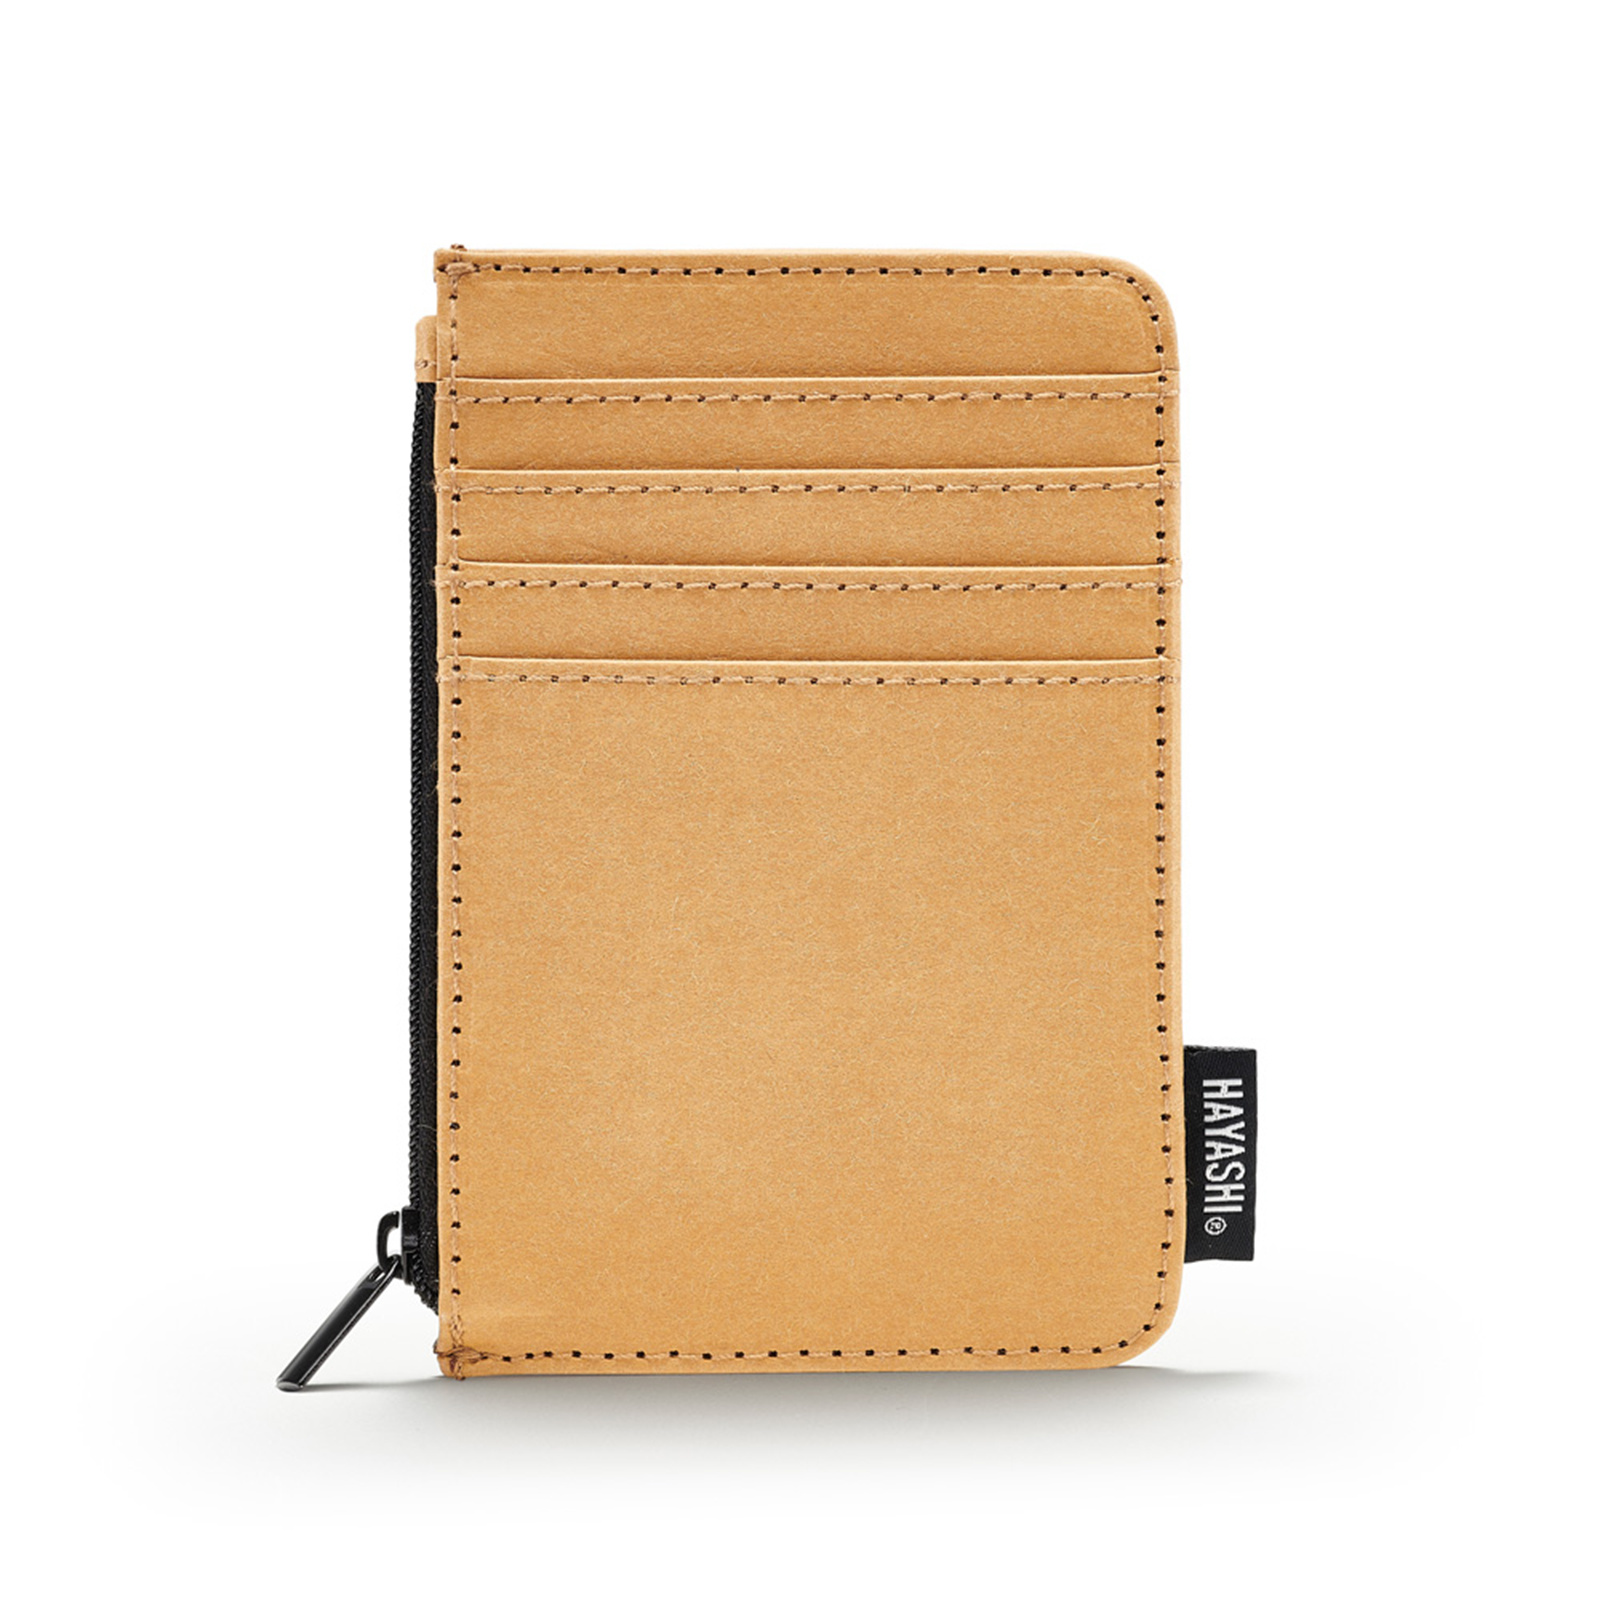 Vegan Paper Leather Zipped Card Case in Dust Colour